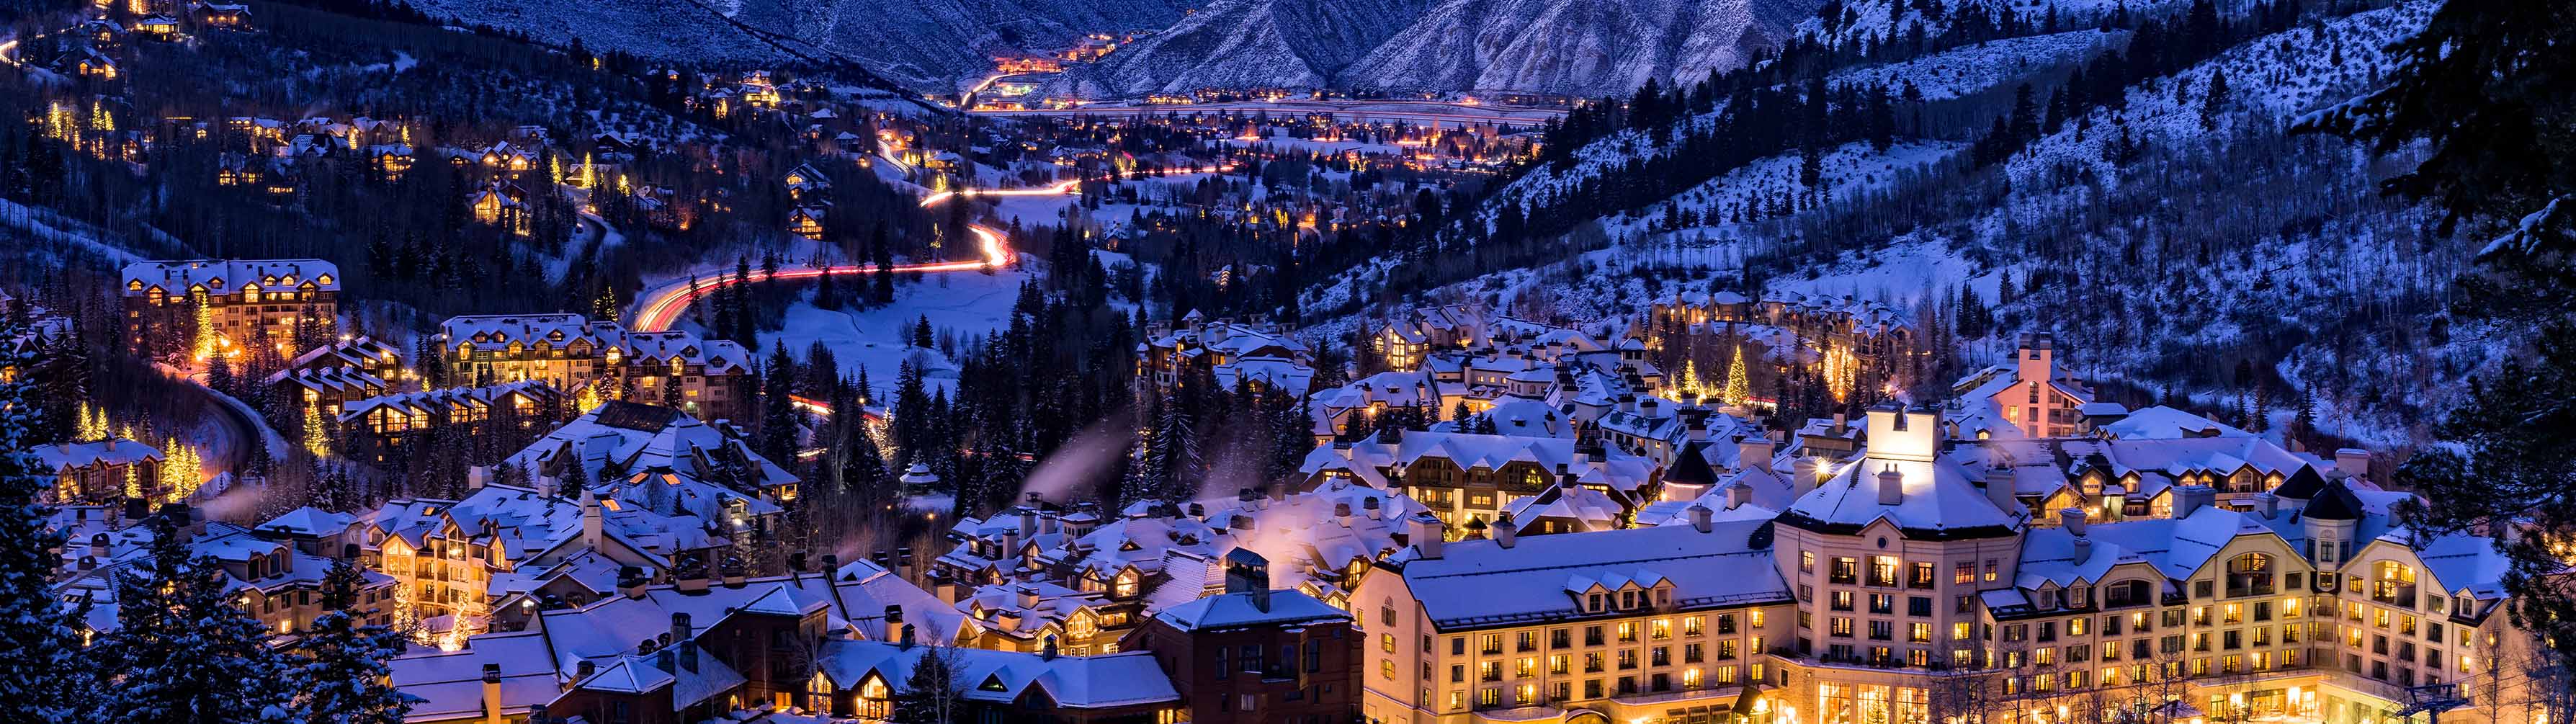 At night, the lovely chalets and valleys of Beaver Creek.